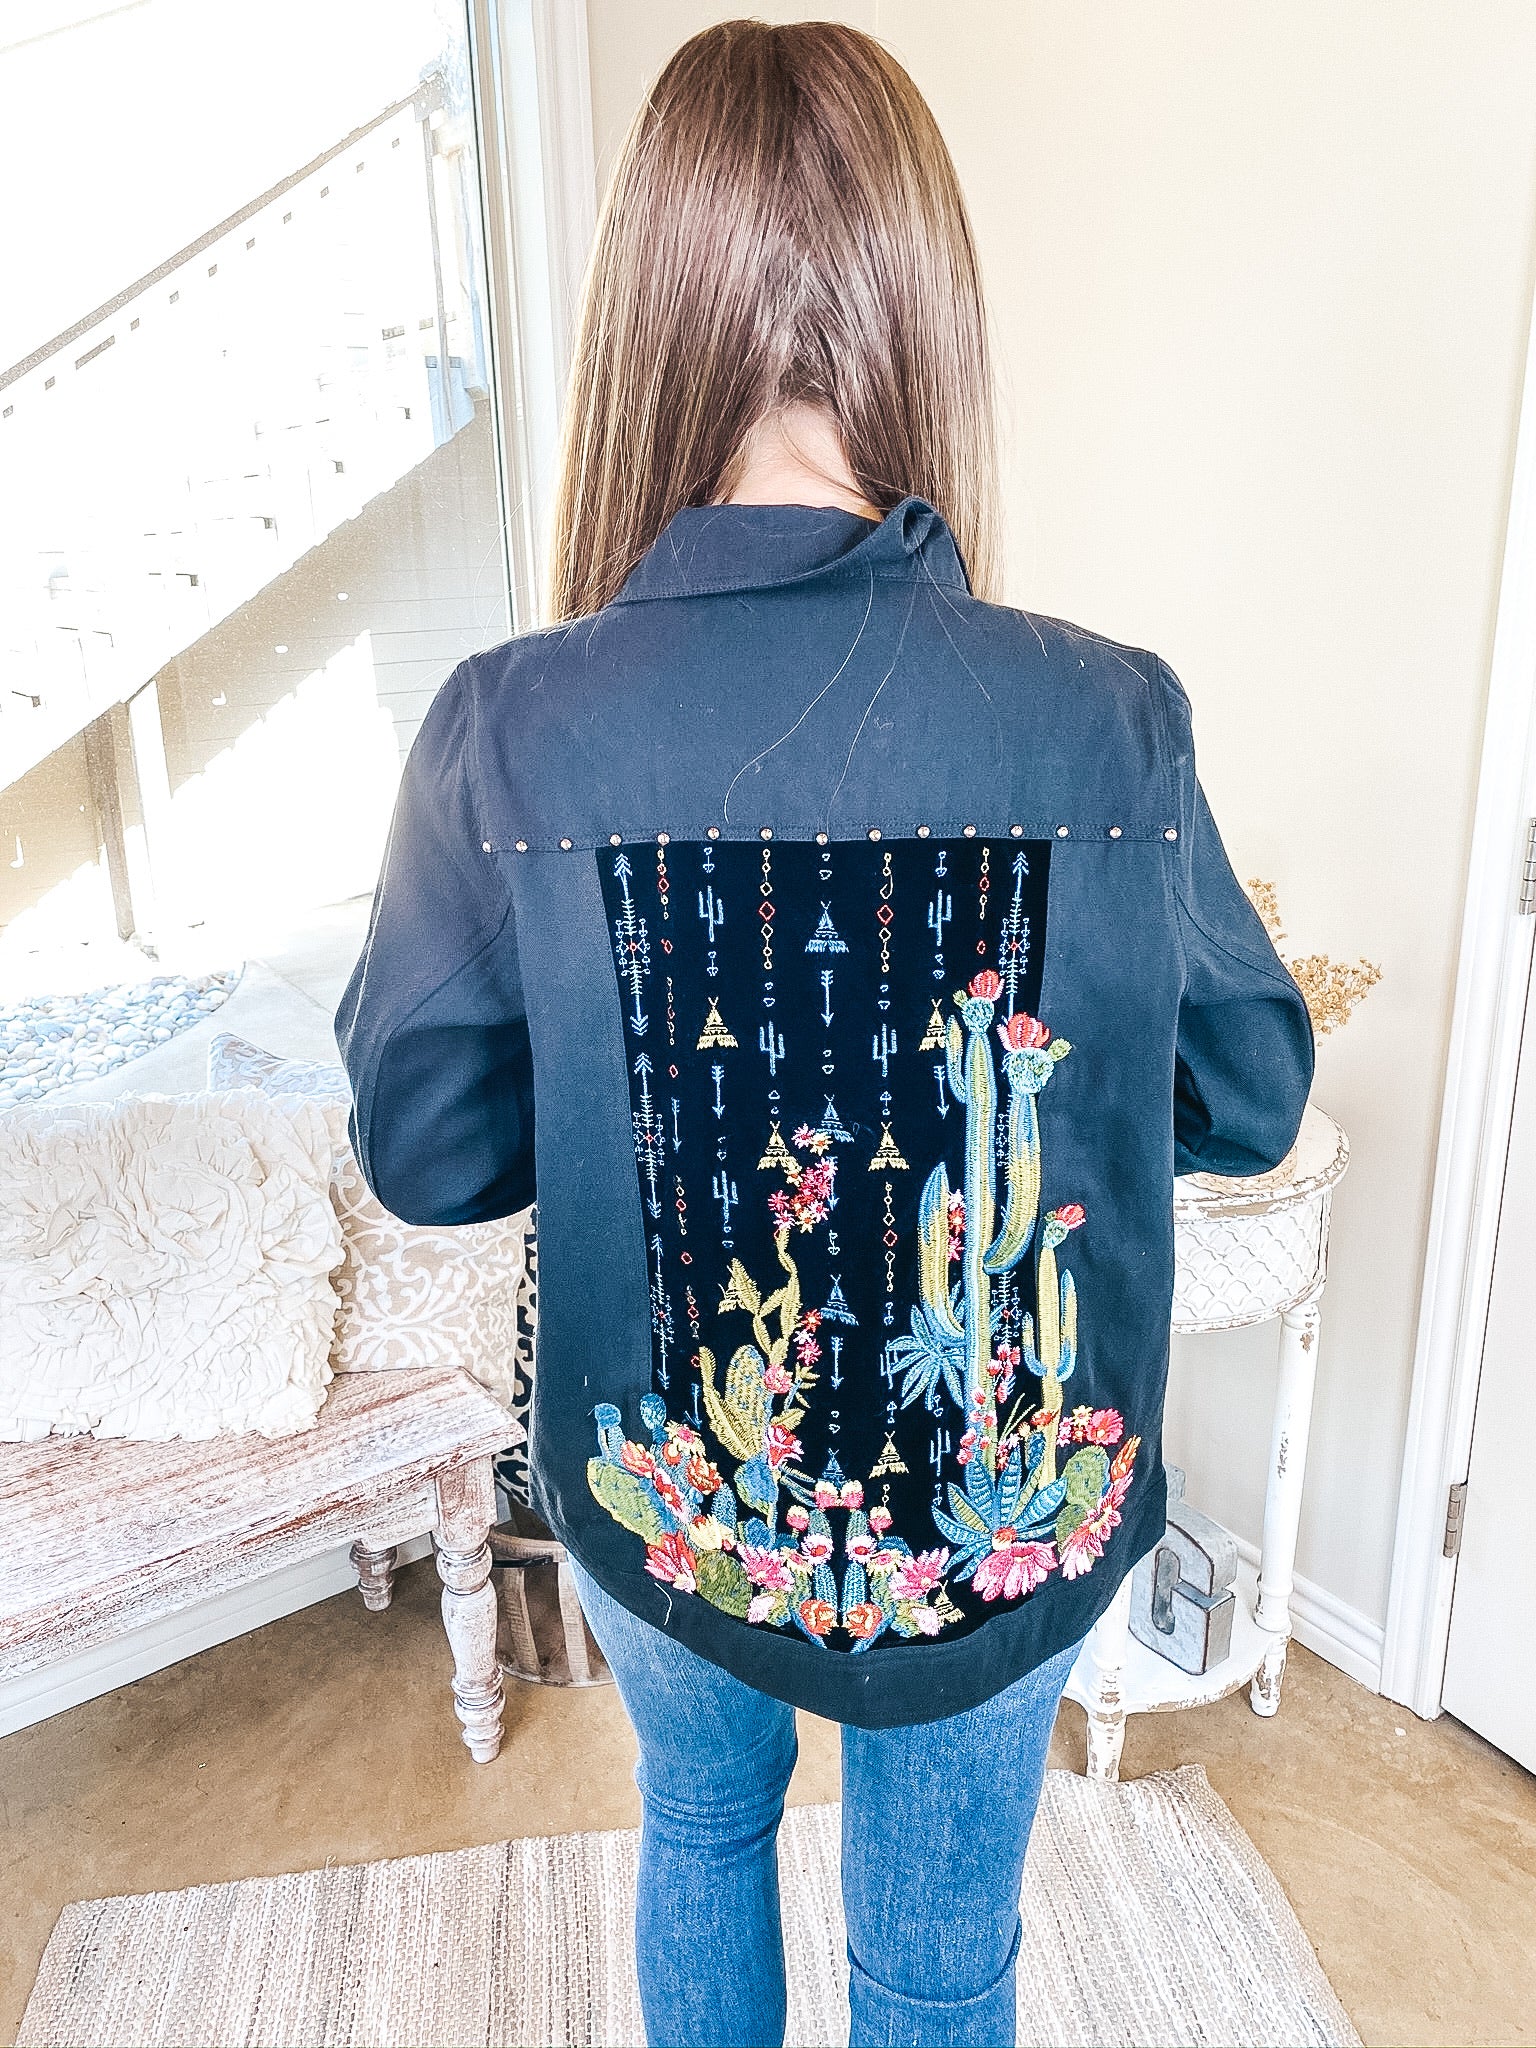 Painted Desert Button Up Jacket with Velvet and Cactus Embroidered Back in Black - Giddy Up Glamour Boutique